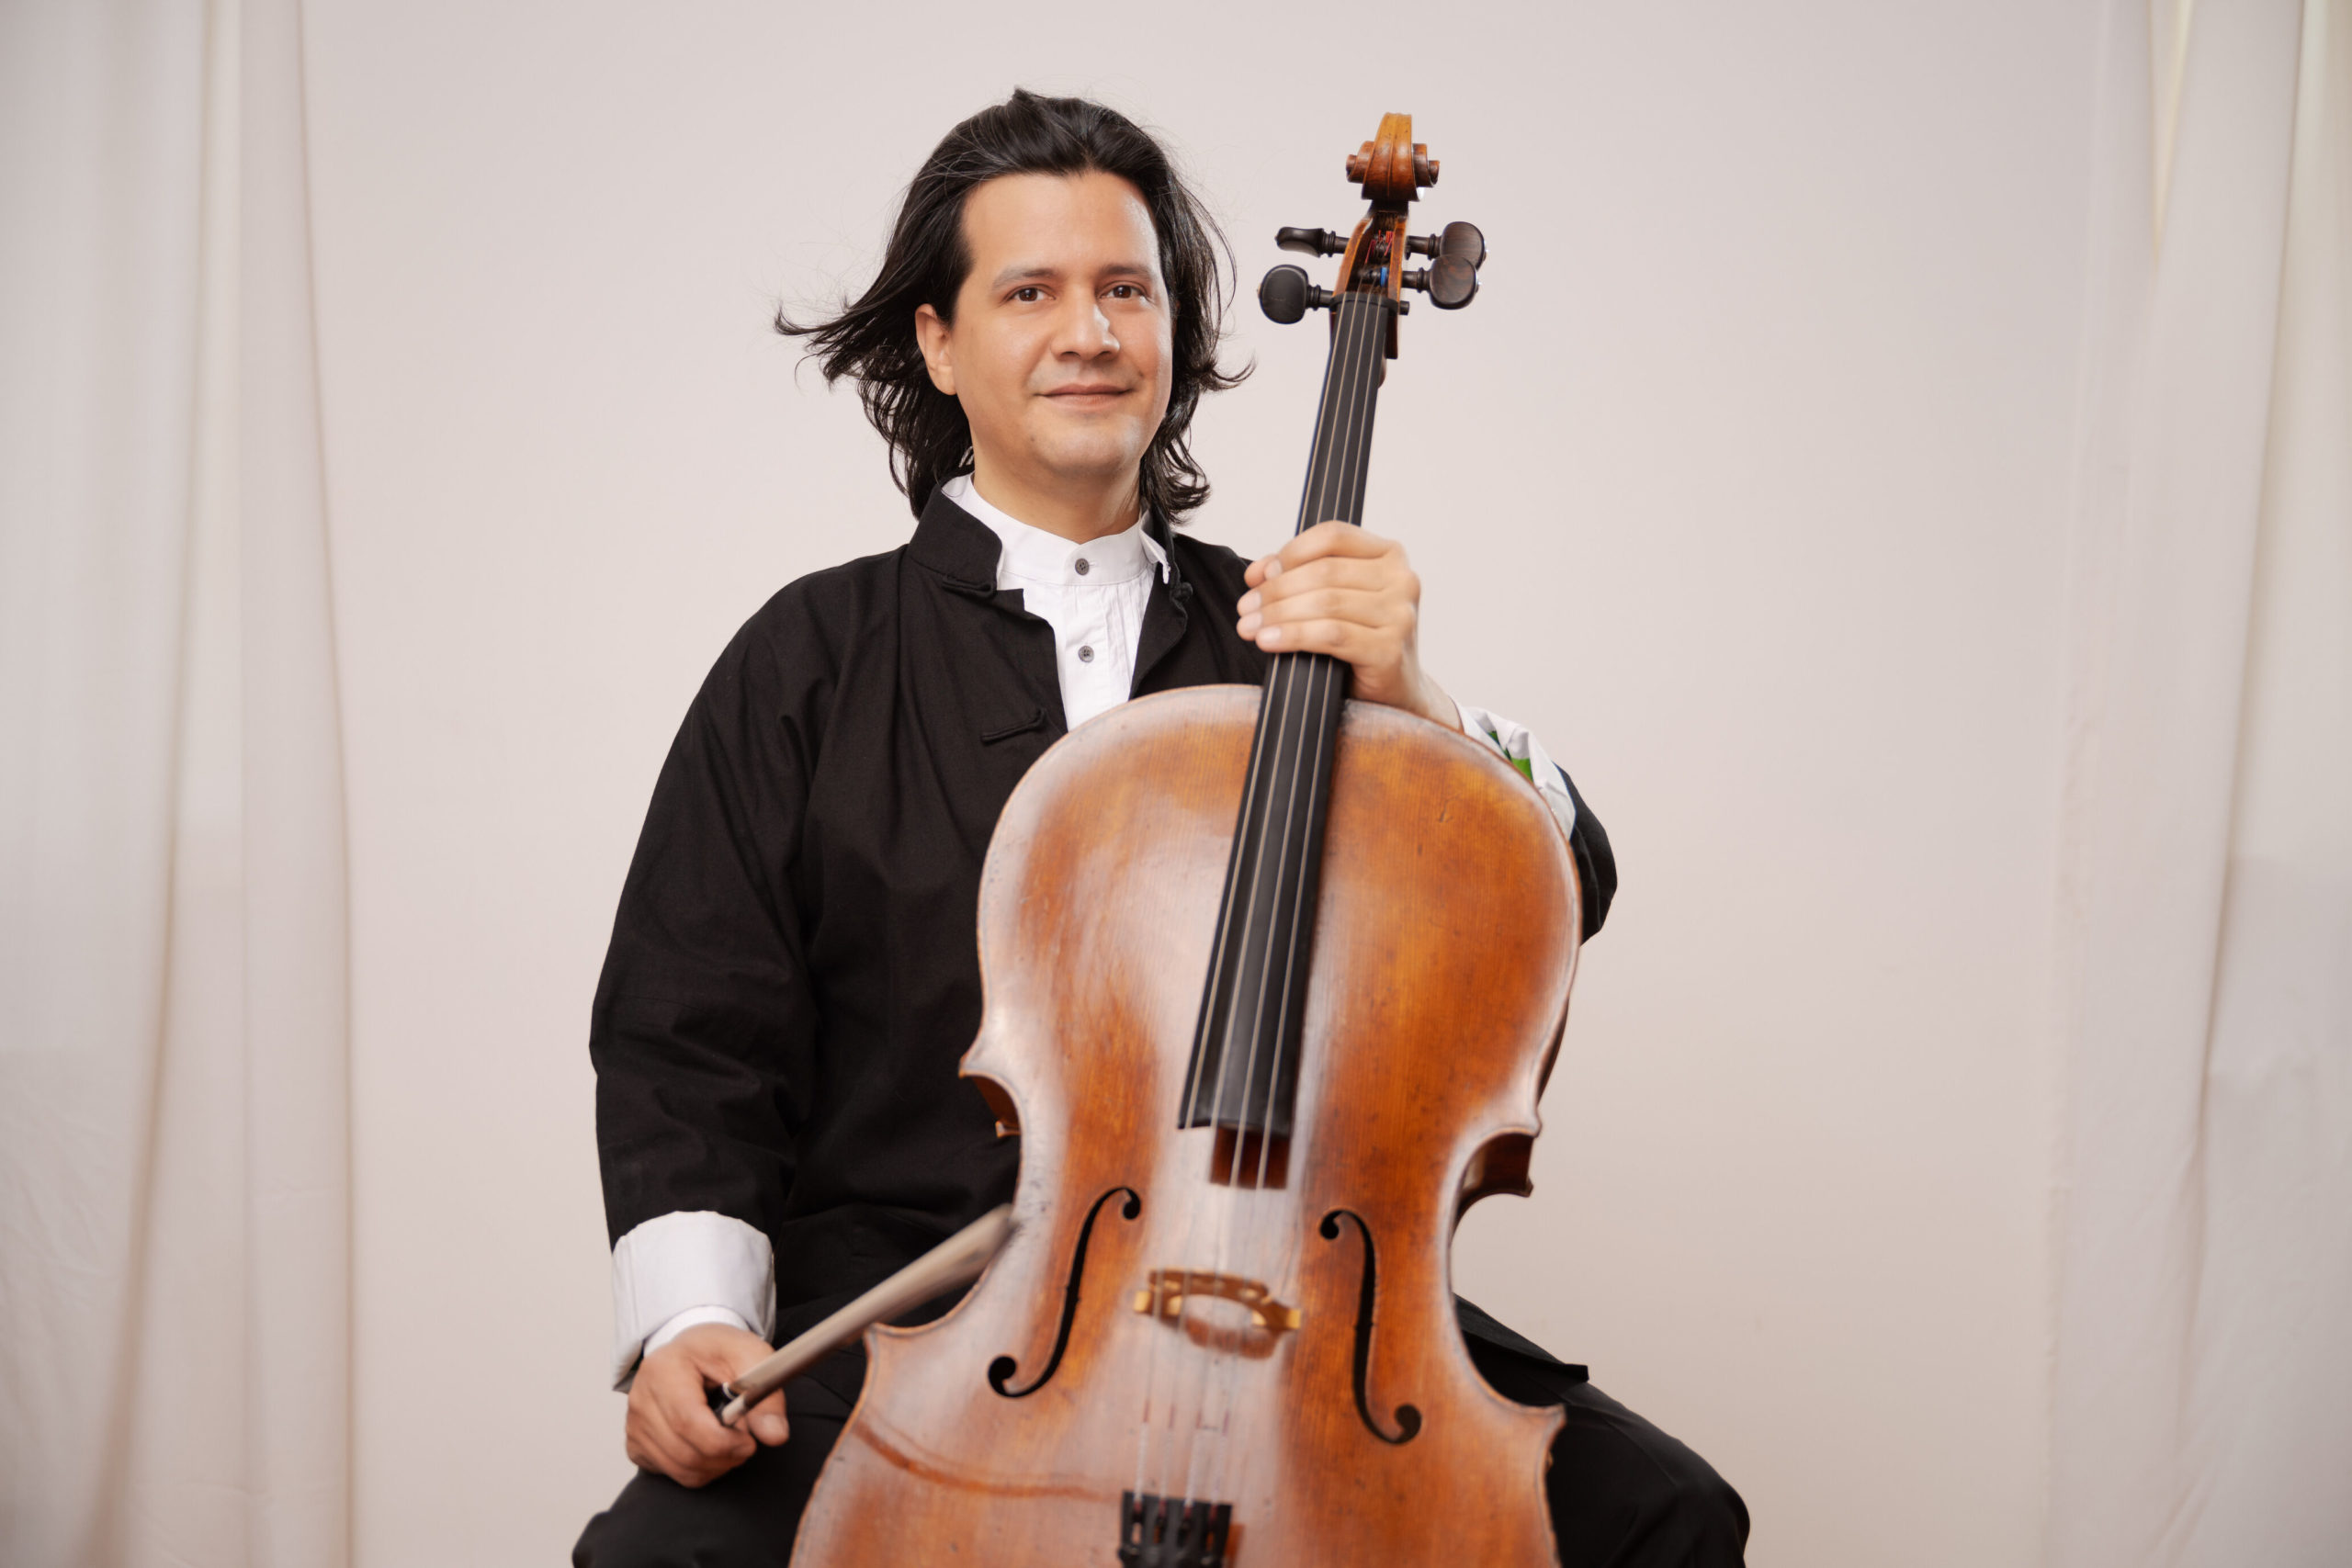 Claudio with a white background, holding his cello and looking at the camera